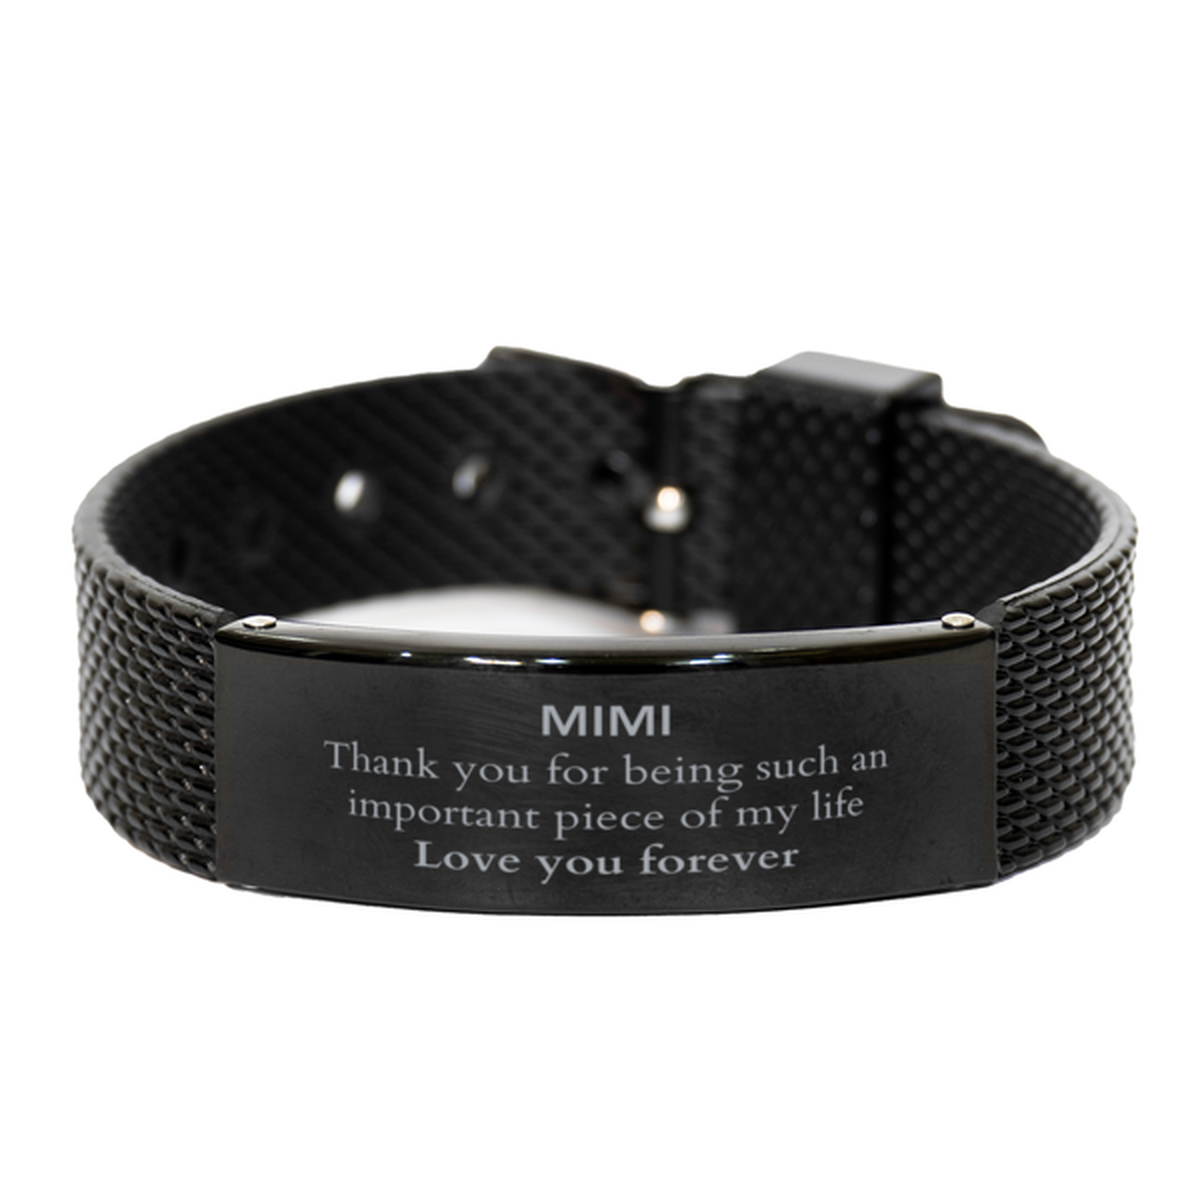 Appropriate Mimi Black Shark Mesh Bracelet Epic Birthday Gifts for Mimi Thank you for being such an important piece of my life Mimi Christmas Mothers Fathers Day